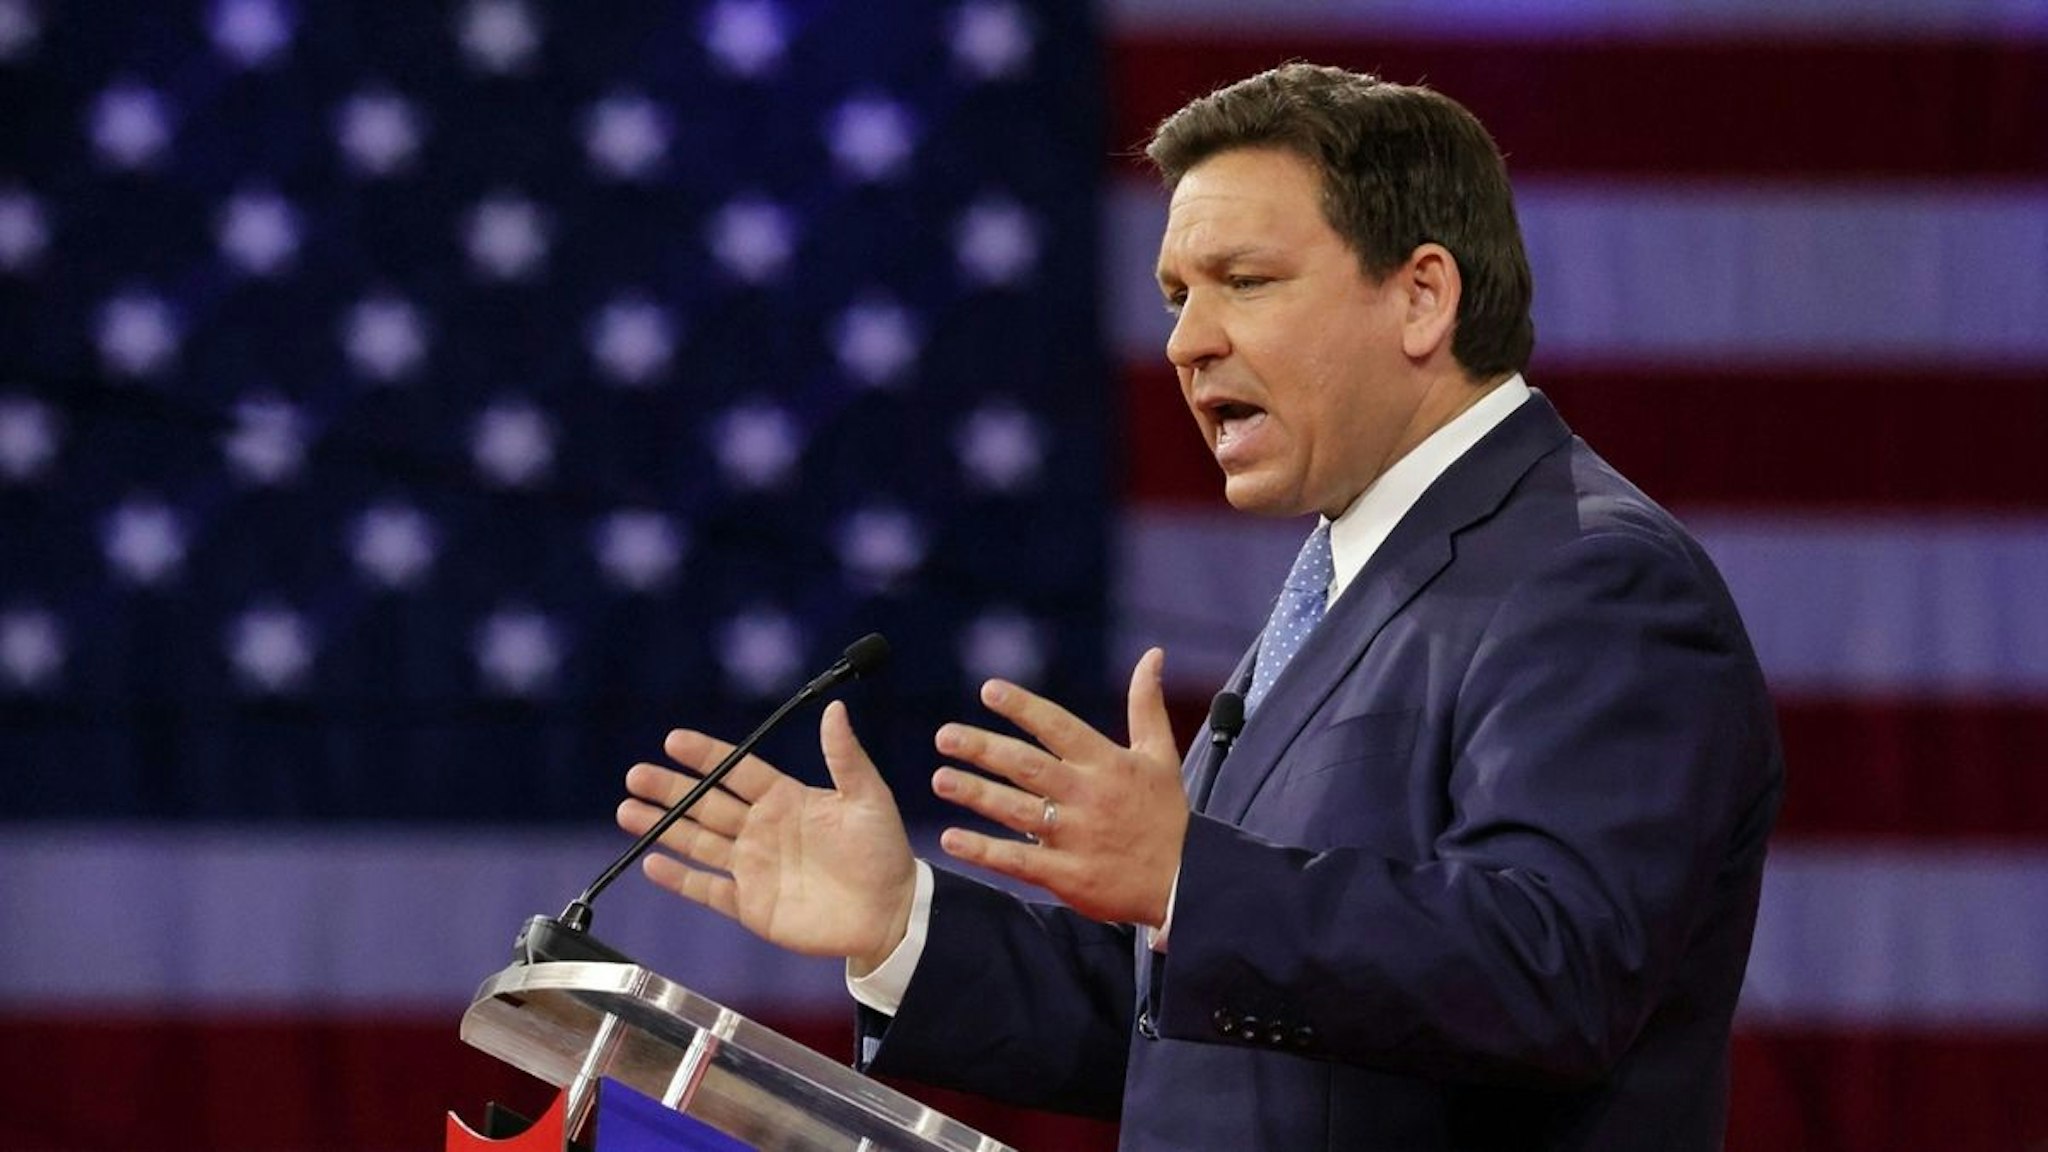 Florida Governor Ron DeSantis delivers remarks at the 2022 CPAC conference at the Rosen Shingle Creek in Orlando, Thursday, Feb. 24, 2022.